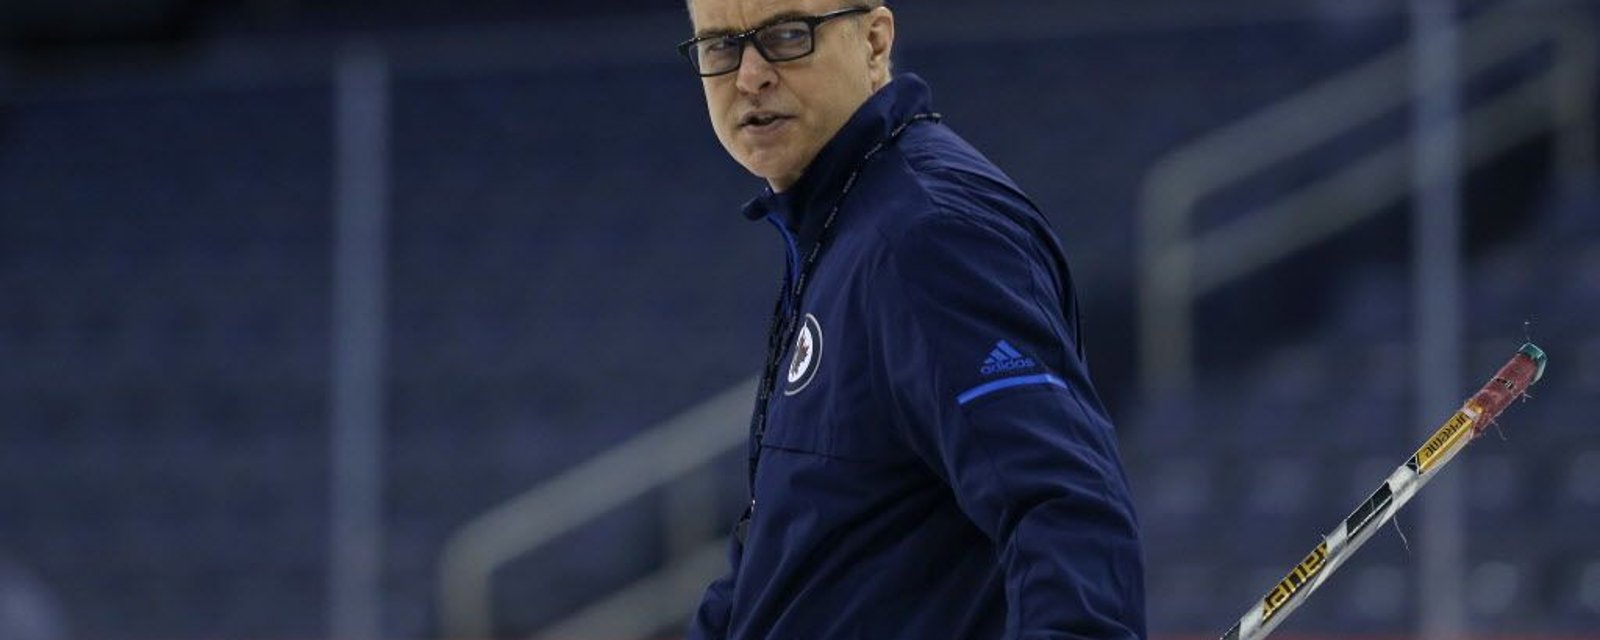 Coach Maurice fires back at Laine for his comments during contract standoff